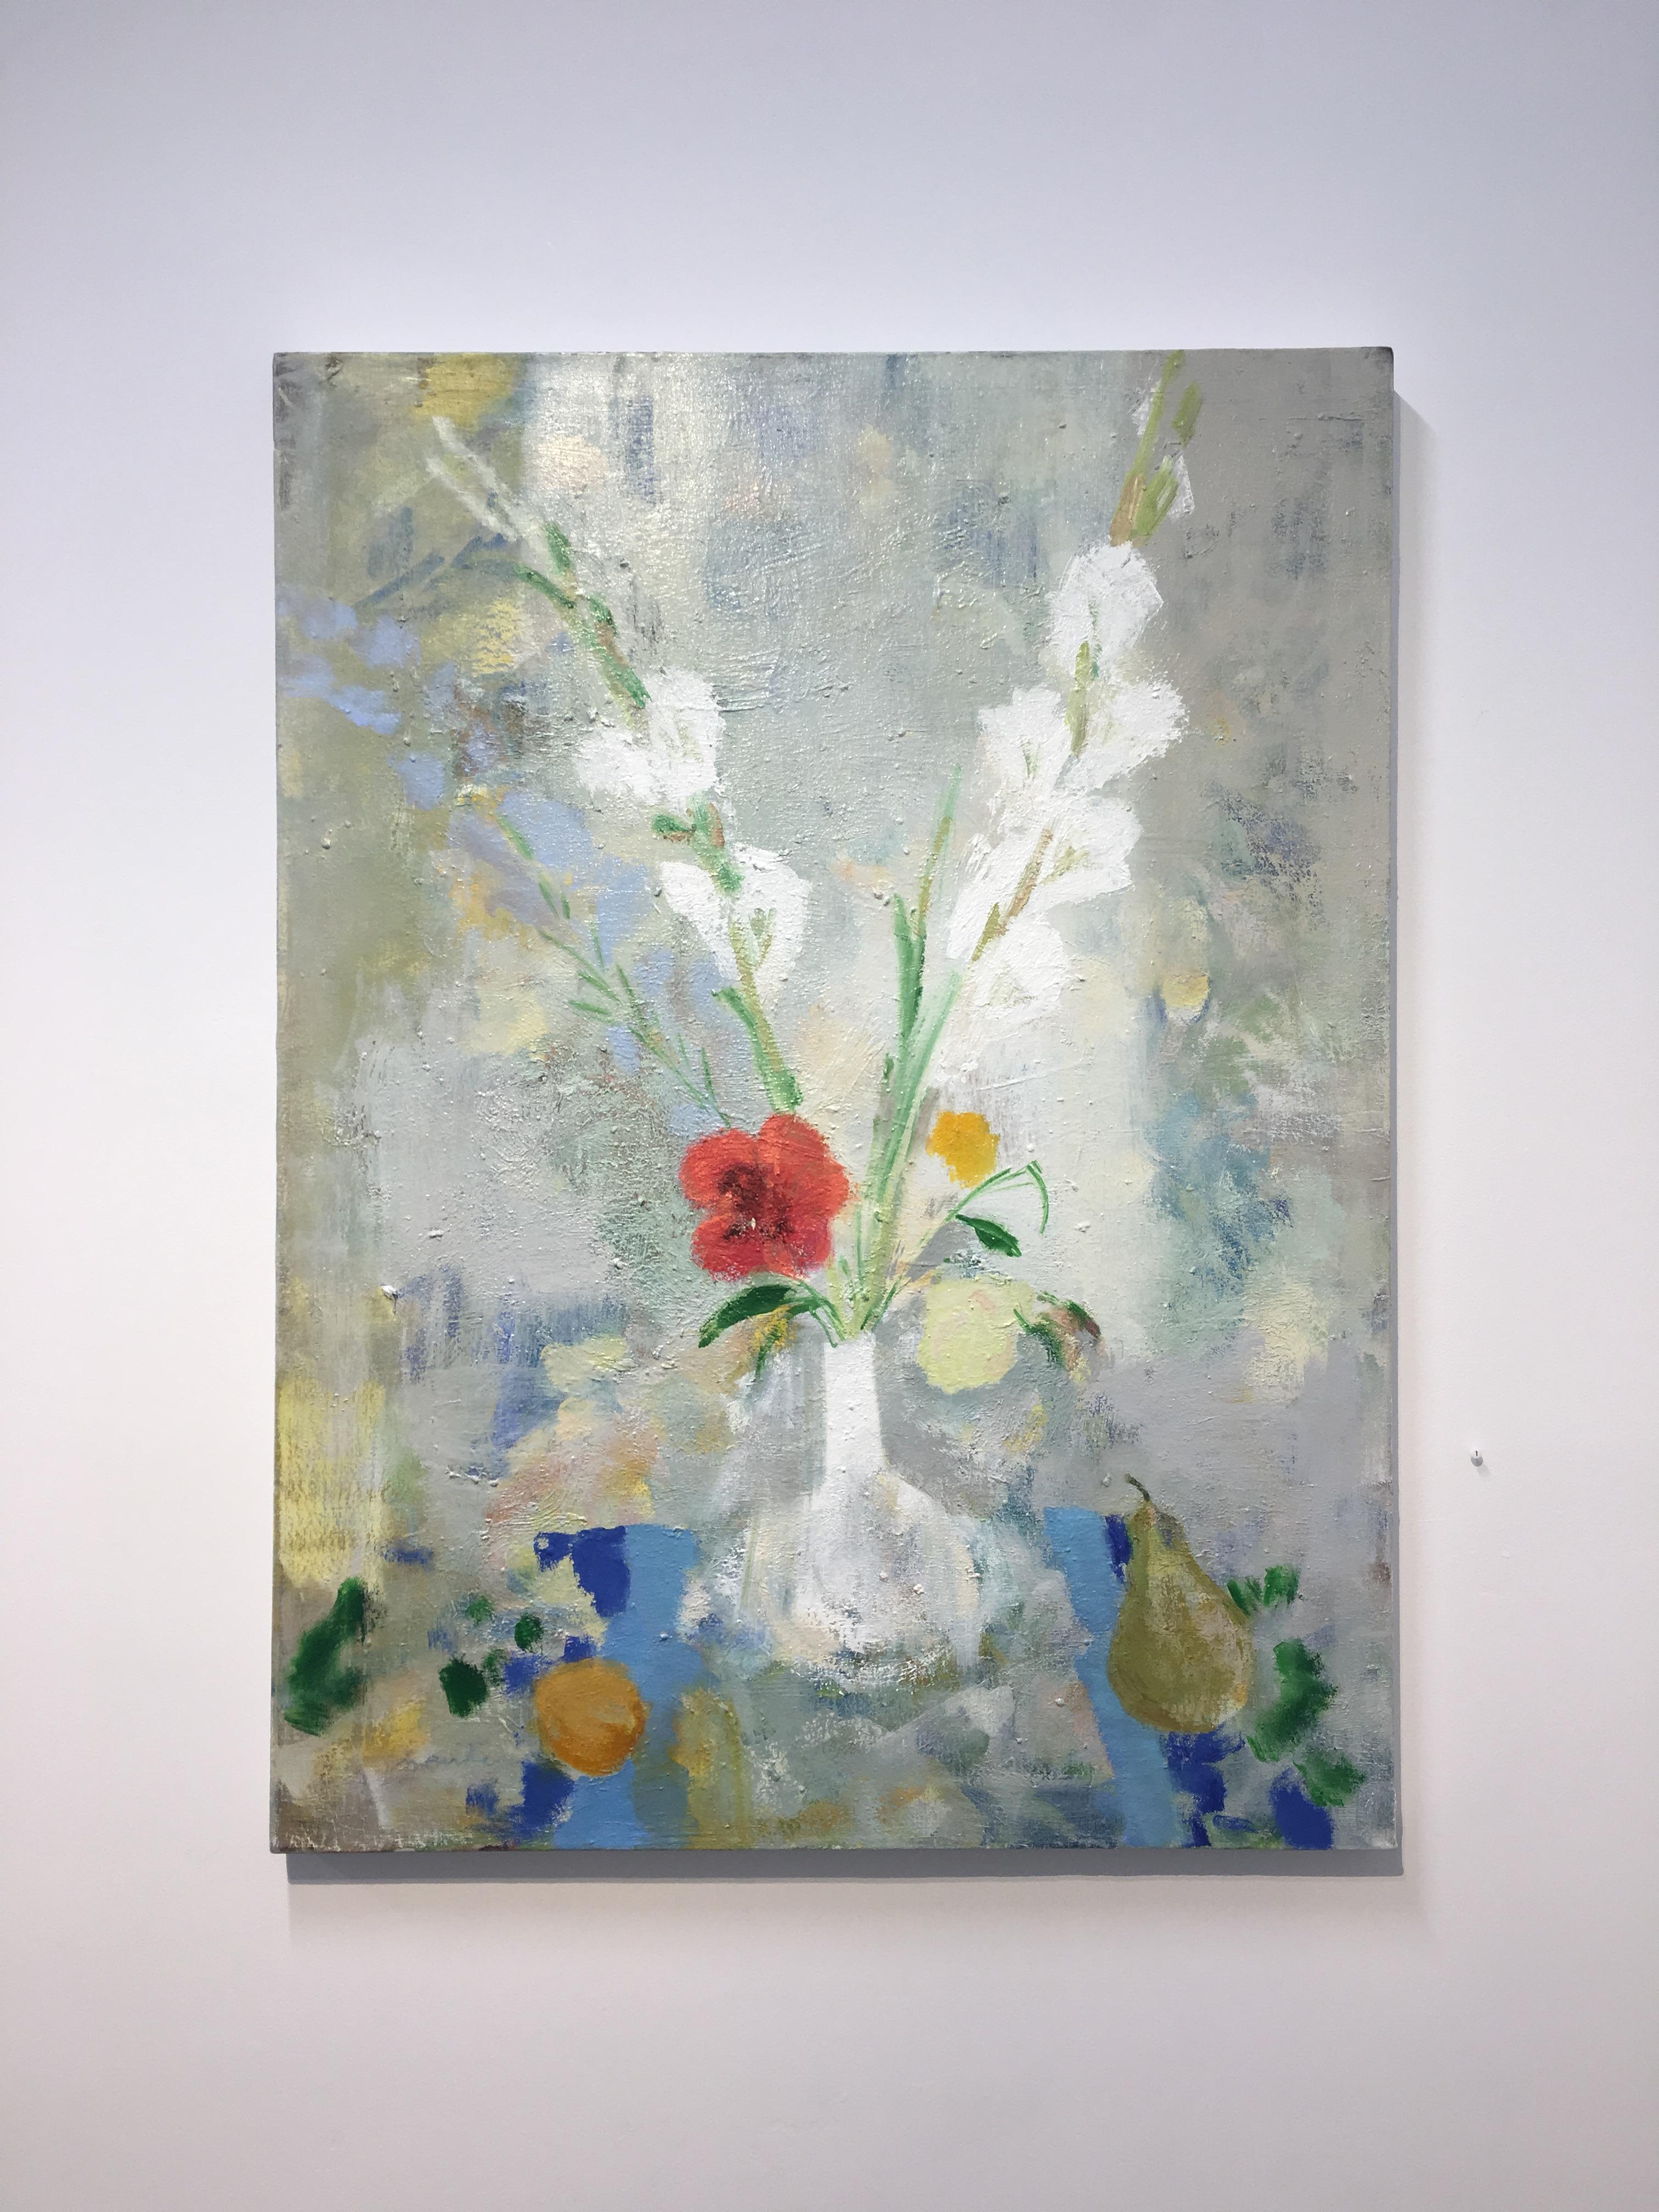 Gladiola Milk, Botanical Still Life with Red, Blue and White Flowers with Fruit - Painting by Melanie Parke